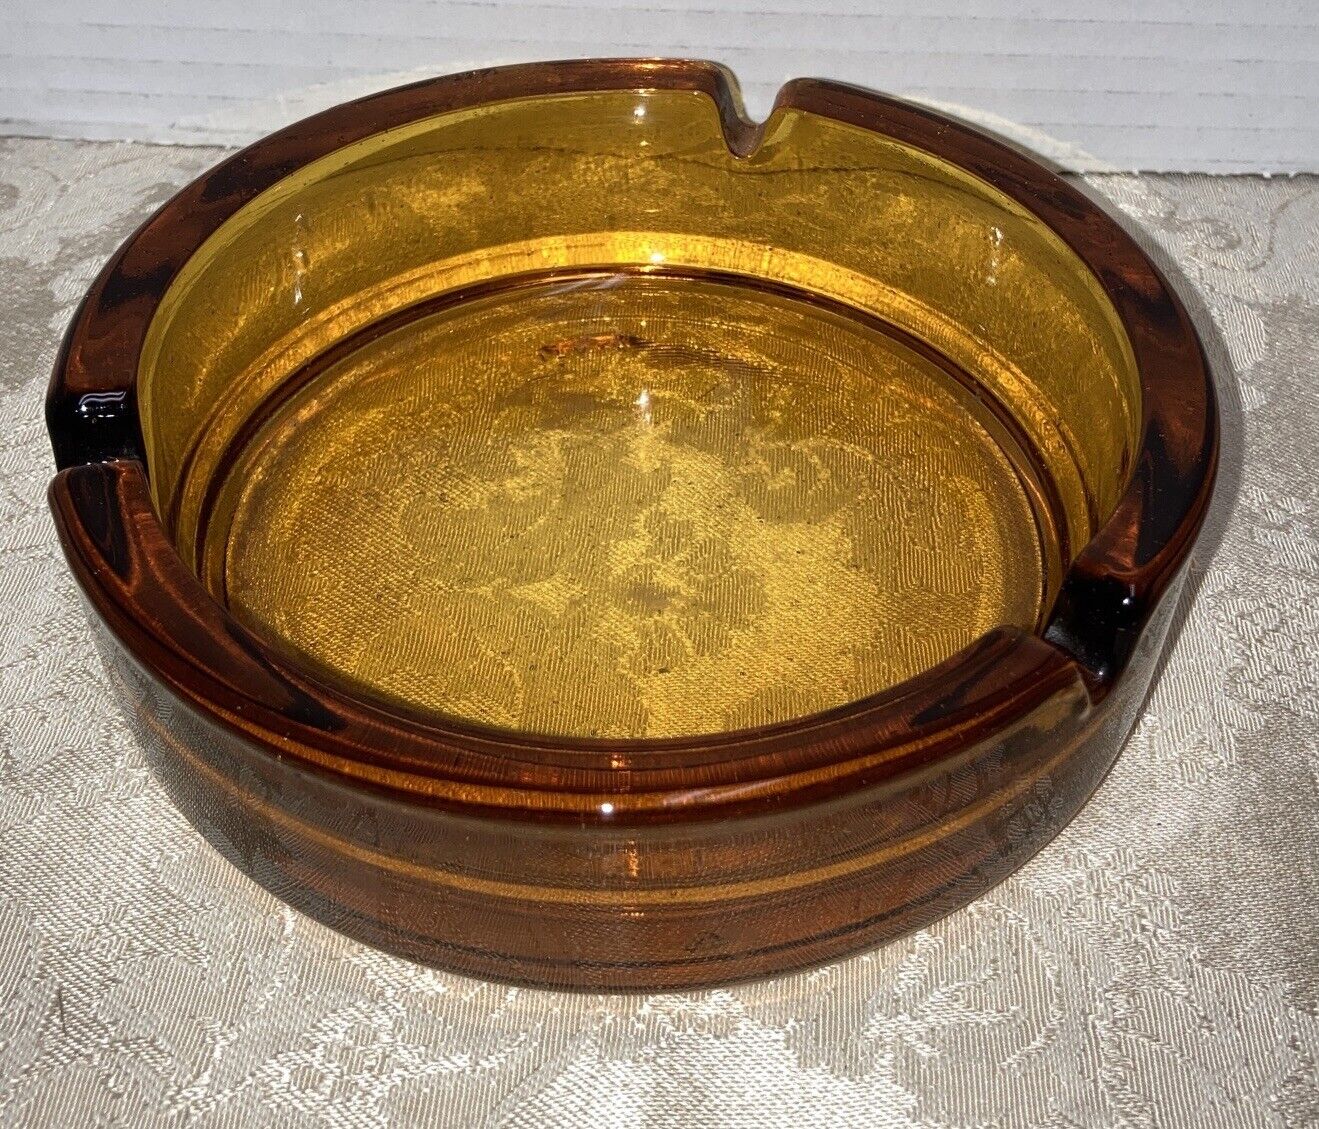 Vintage Amber Ash Tray 5.5”x .5” Heavy thick glass 3 Slots no chips